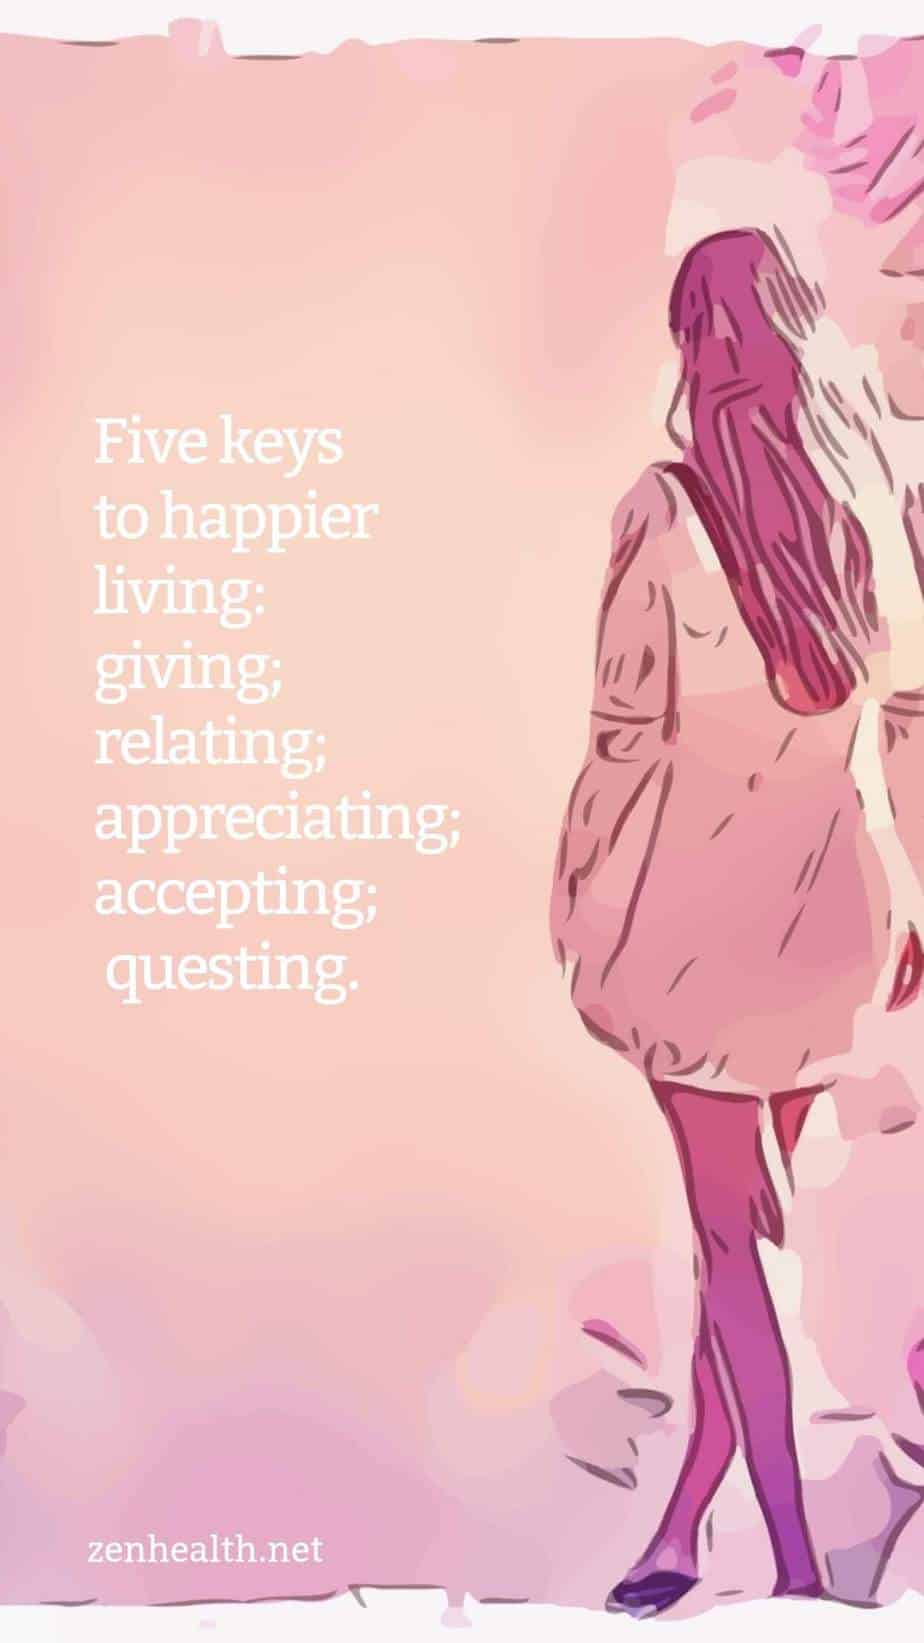 Five keys to happier living: giving; relating; appreciating; accepting; questing.